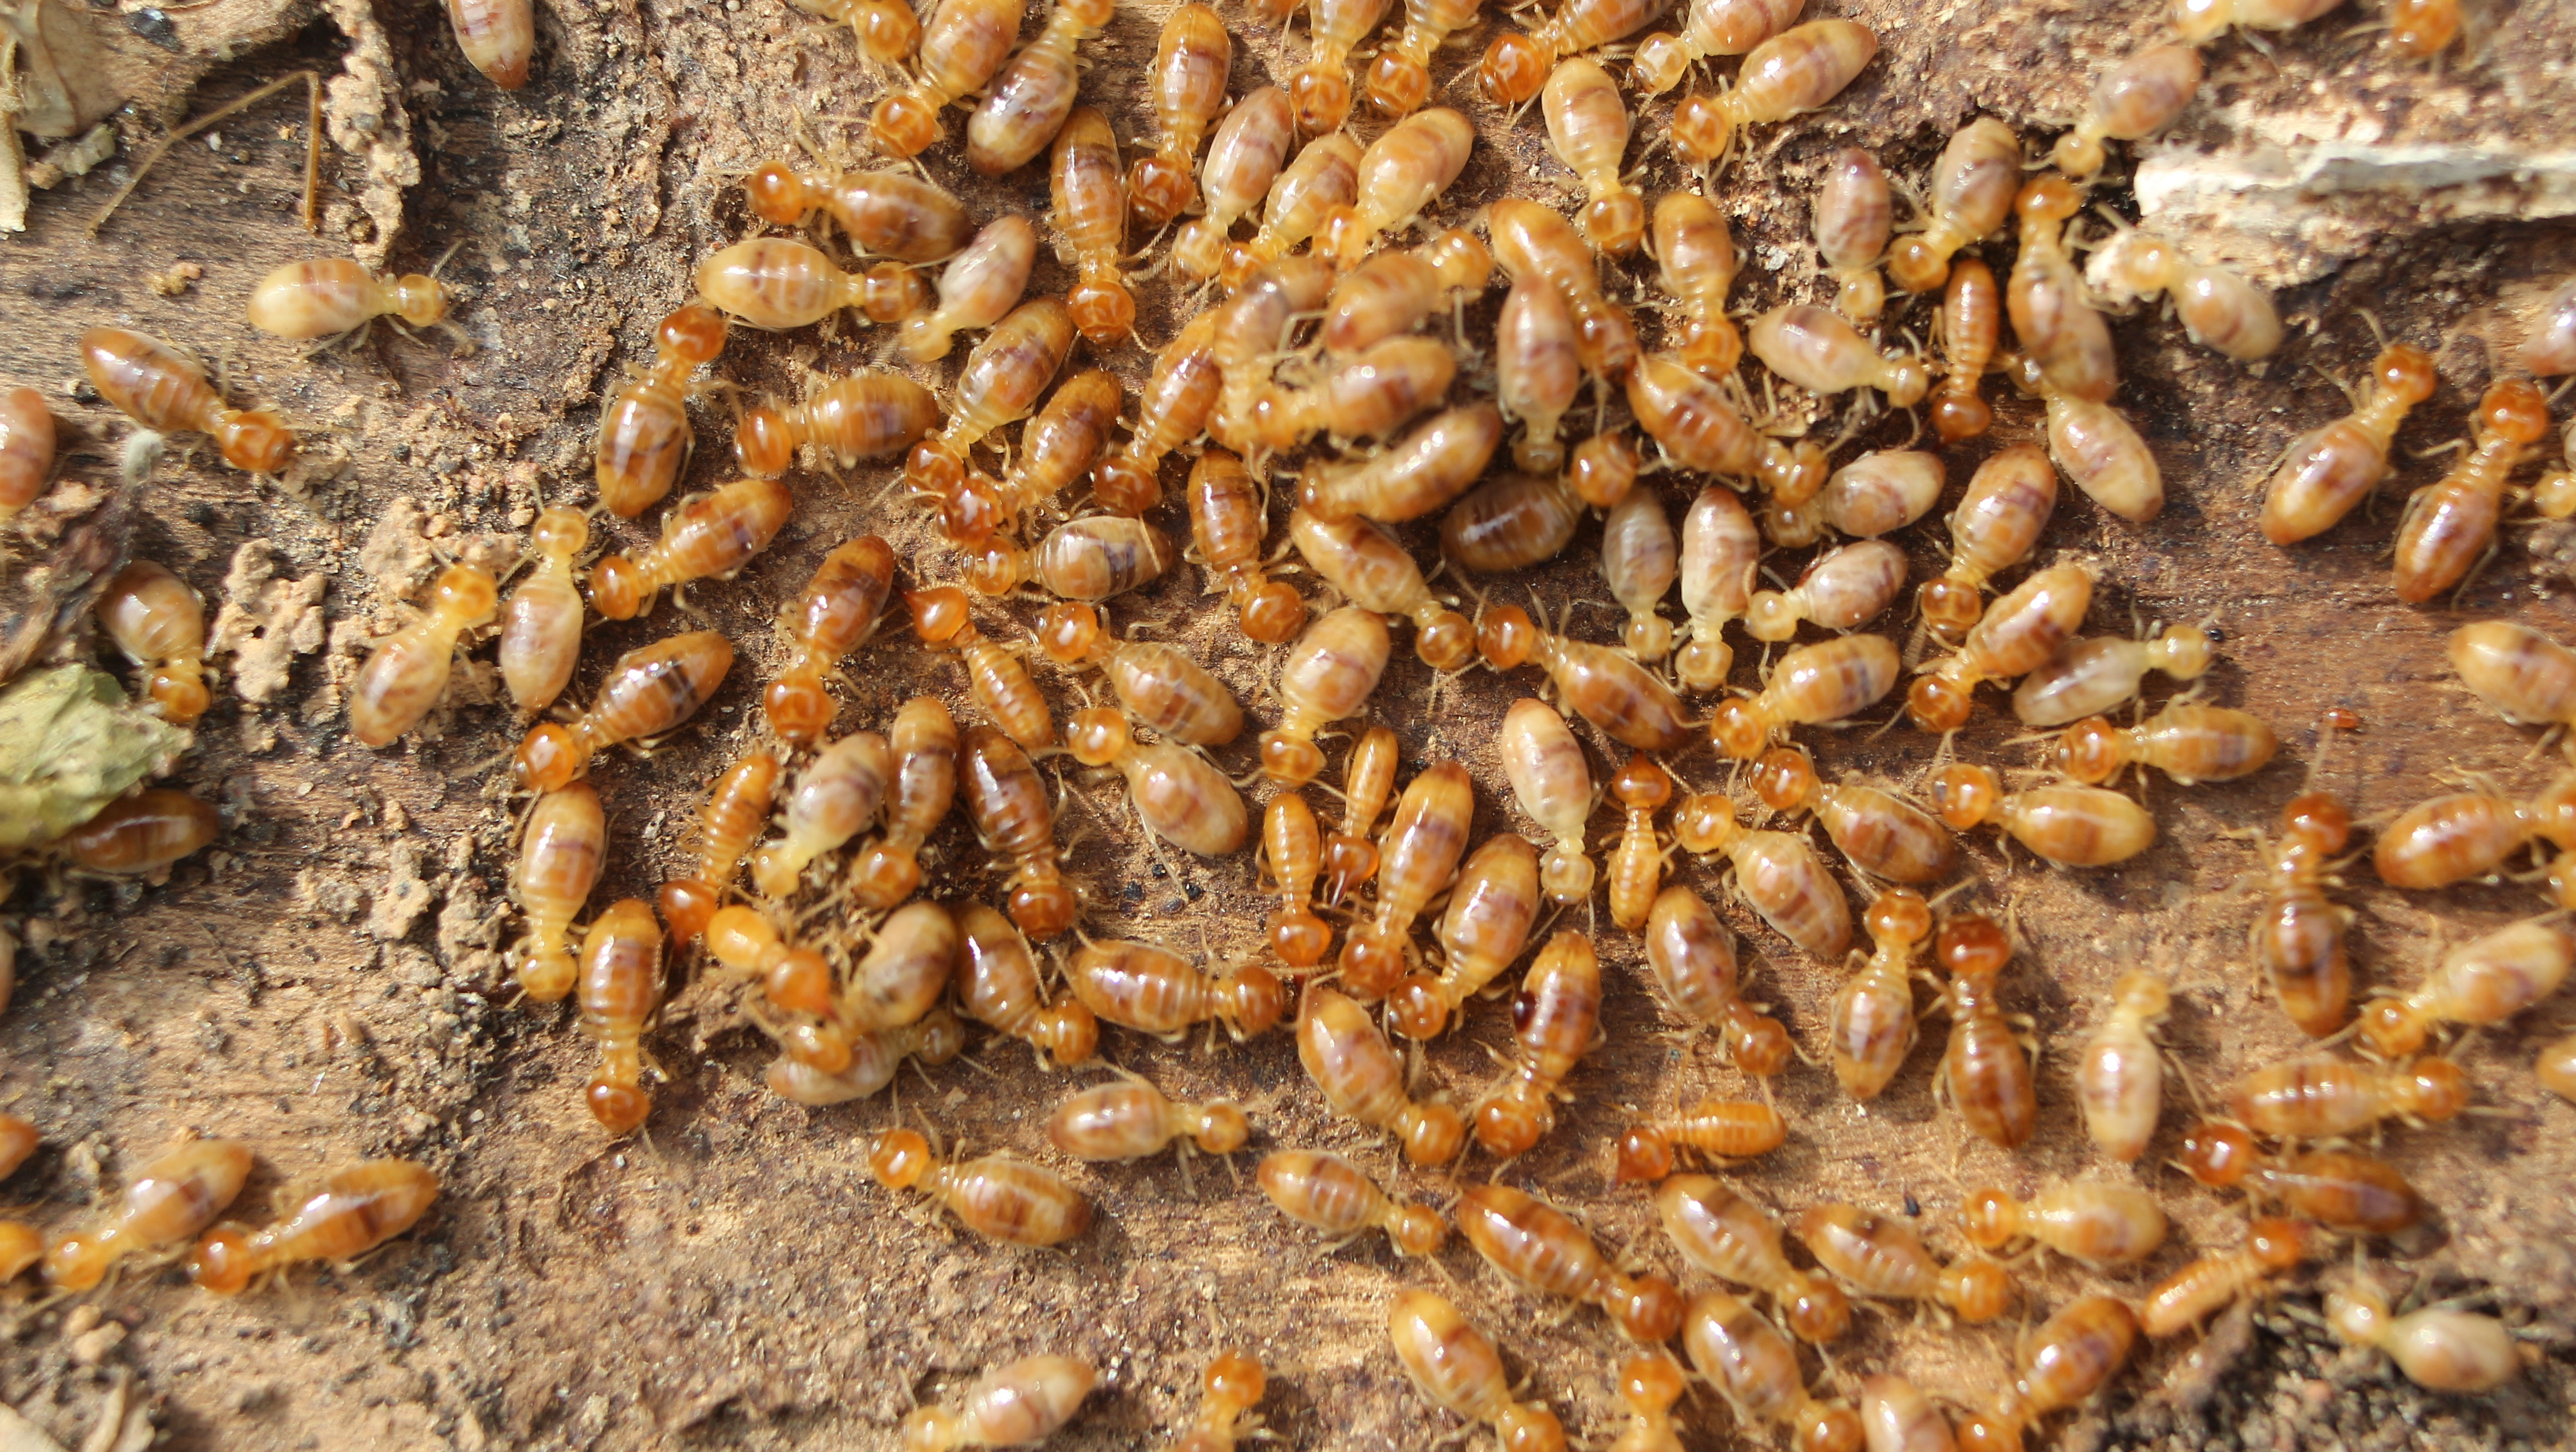 A swarm of termites on a wooden surface